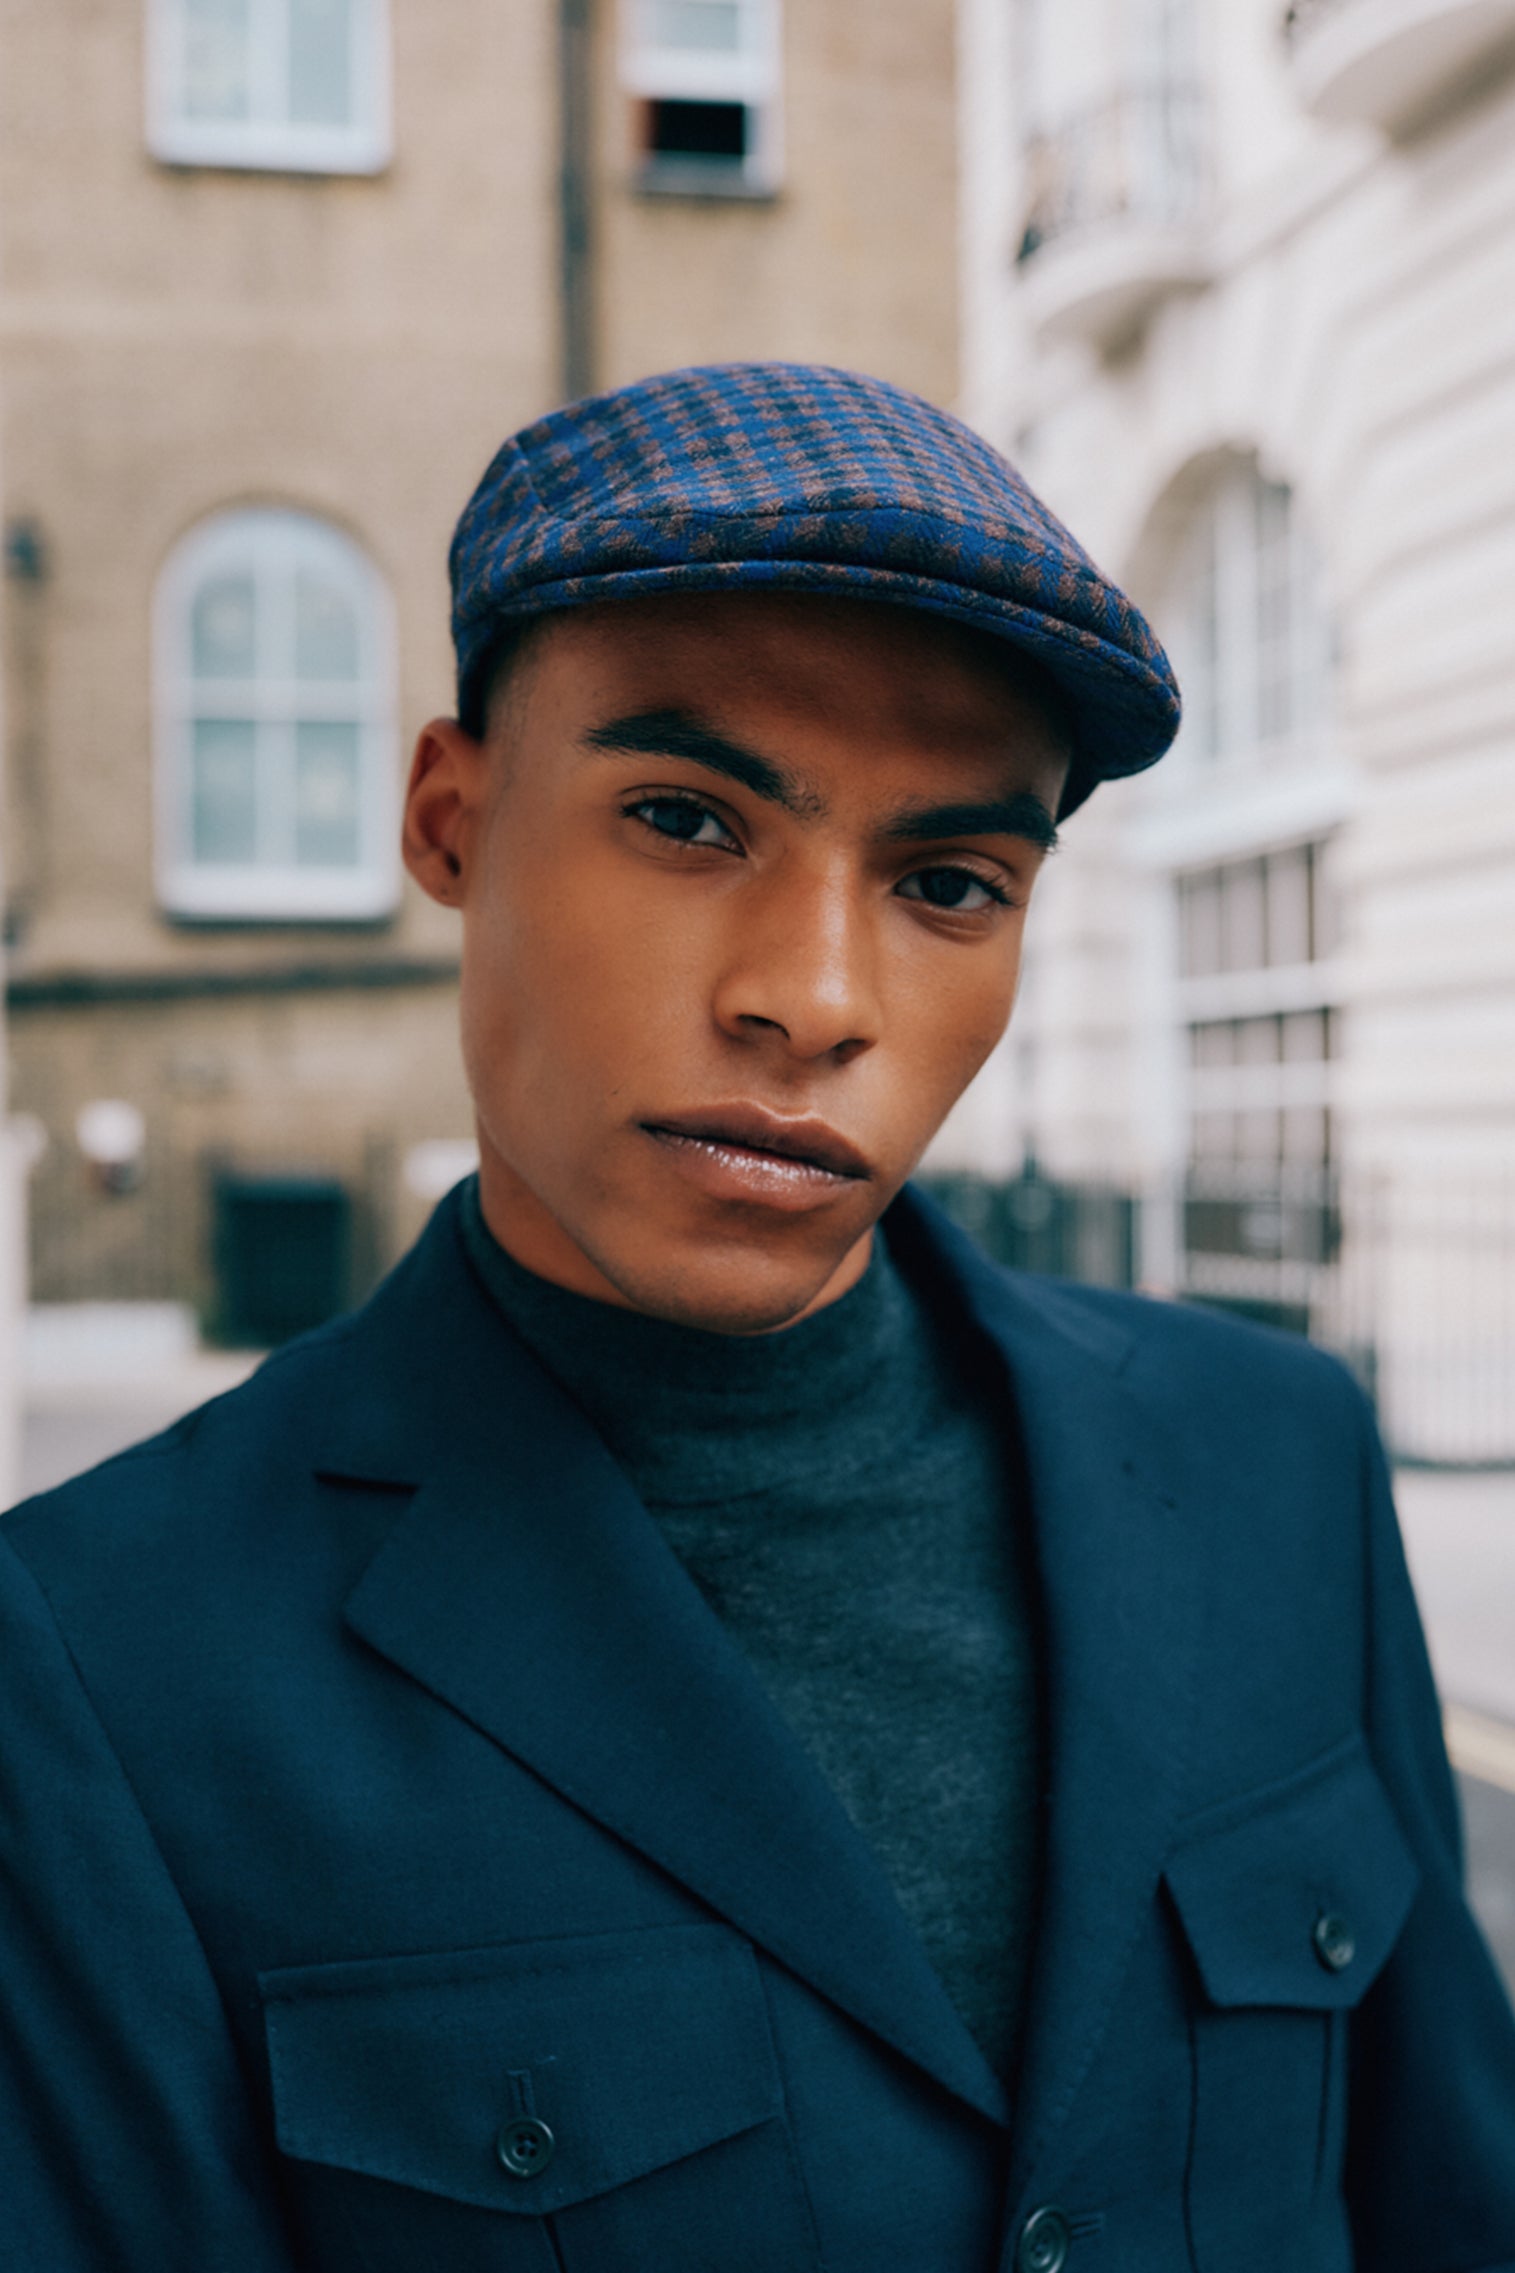 Grosvenor Check Flat Cap - Products - Lock & Co. Hatters London UK